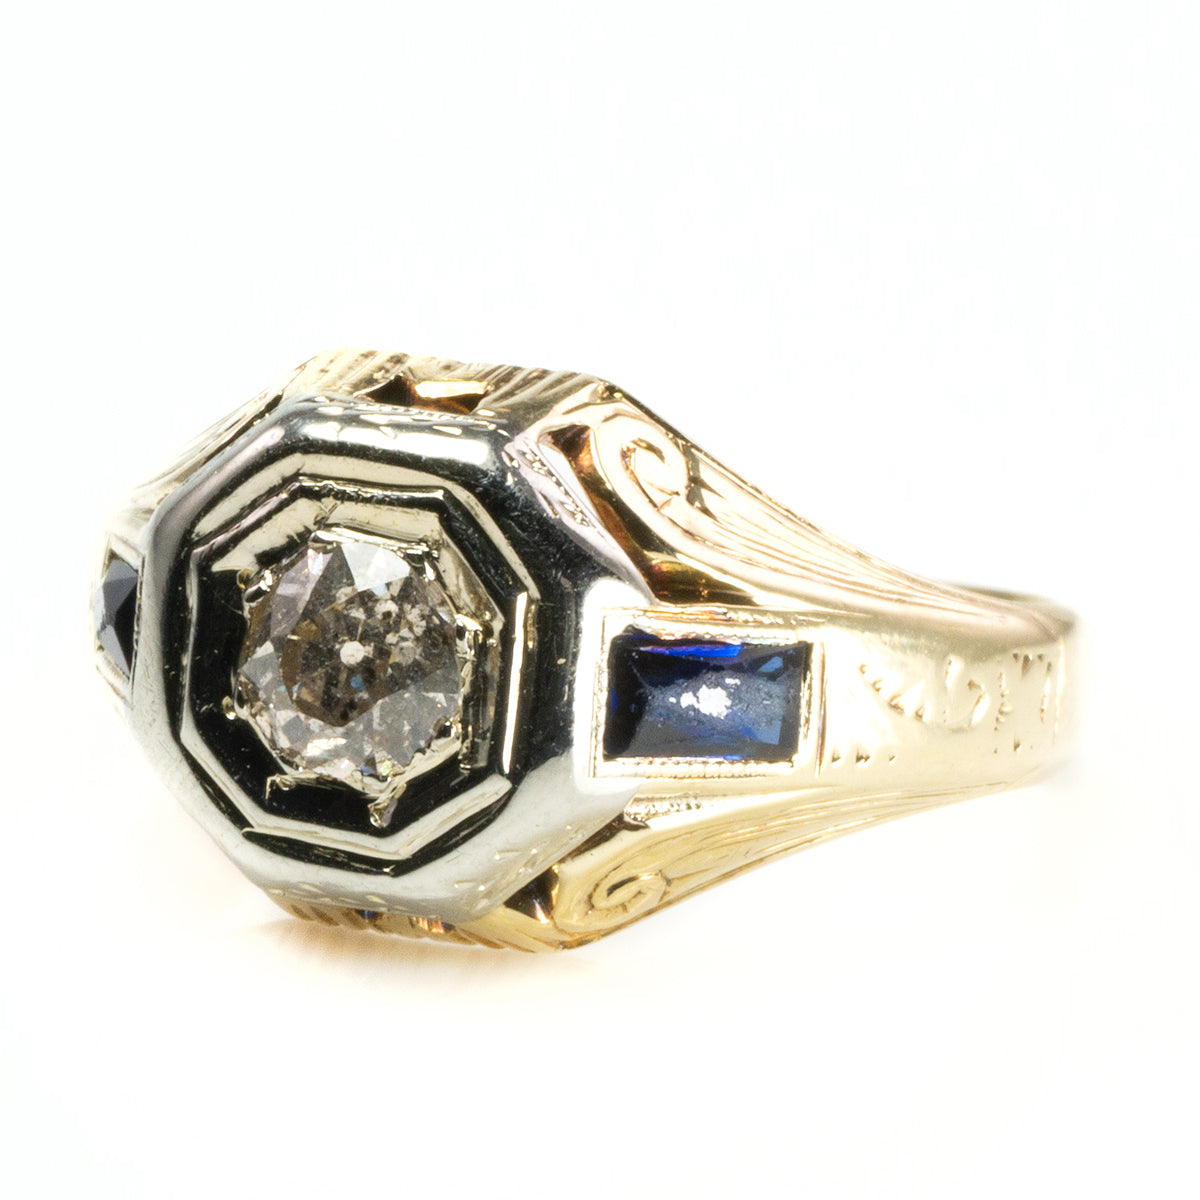 Great Lakes Boutique Vintage 14 k / 18 k Art Deco Diamond and Sapphire Ring